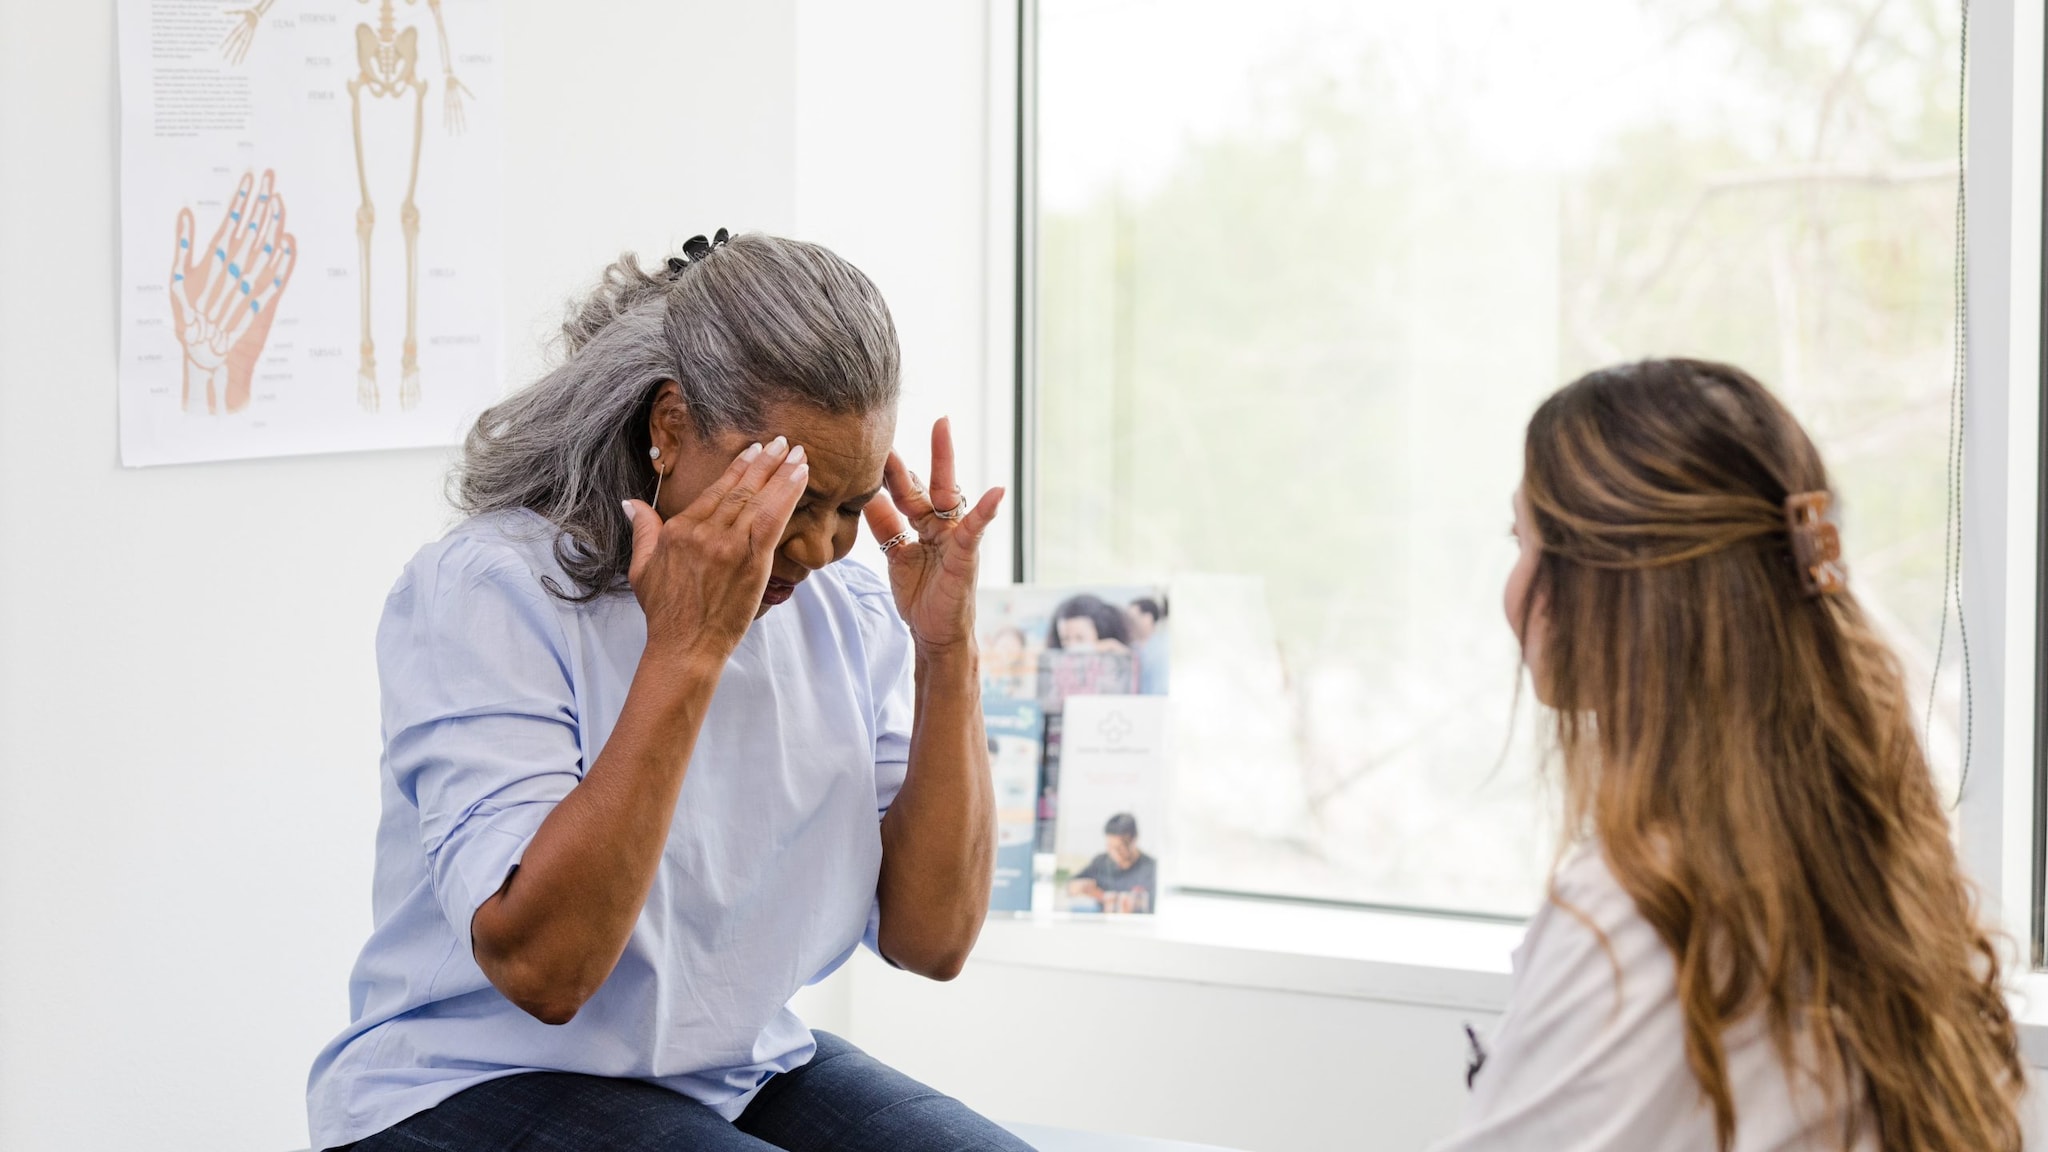 Patient with headache in doctors office